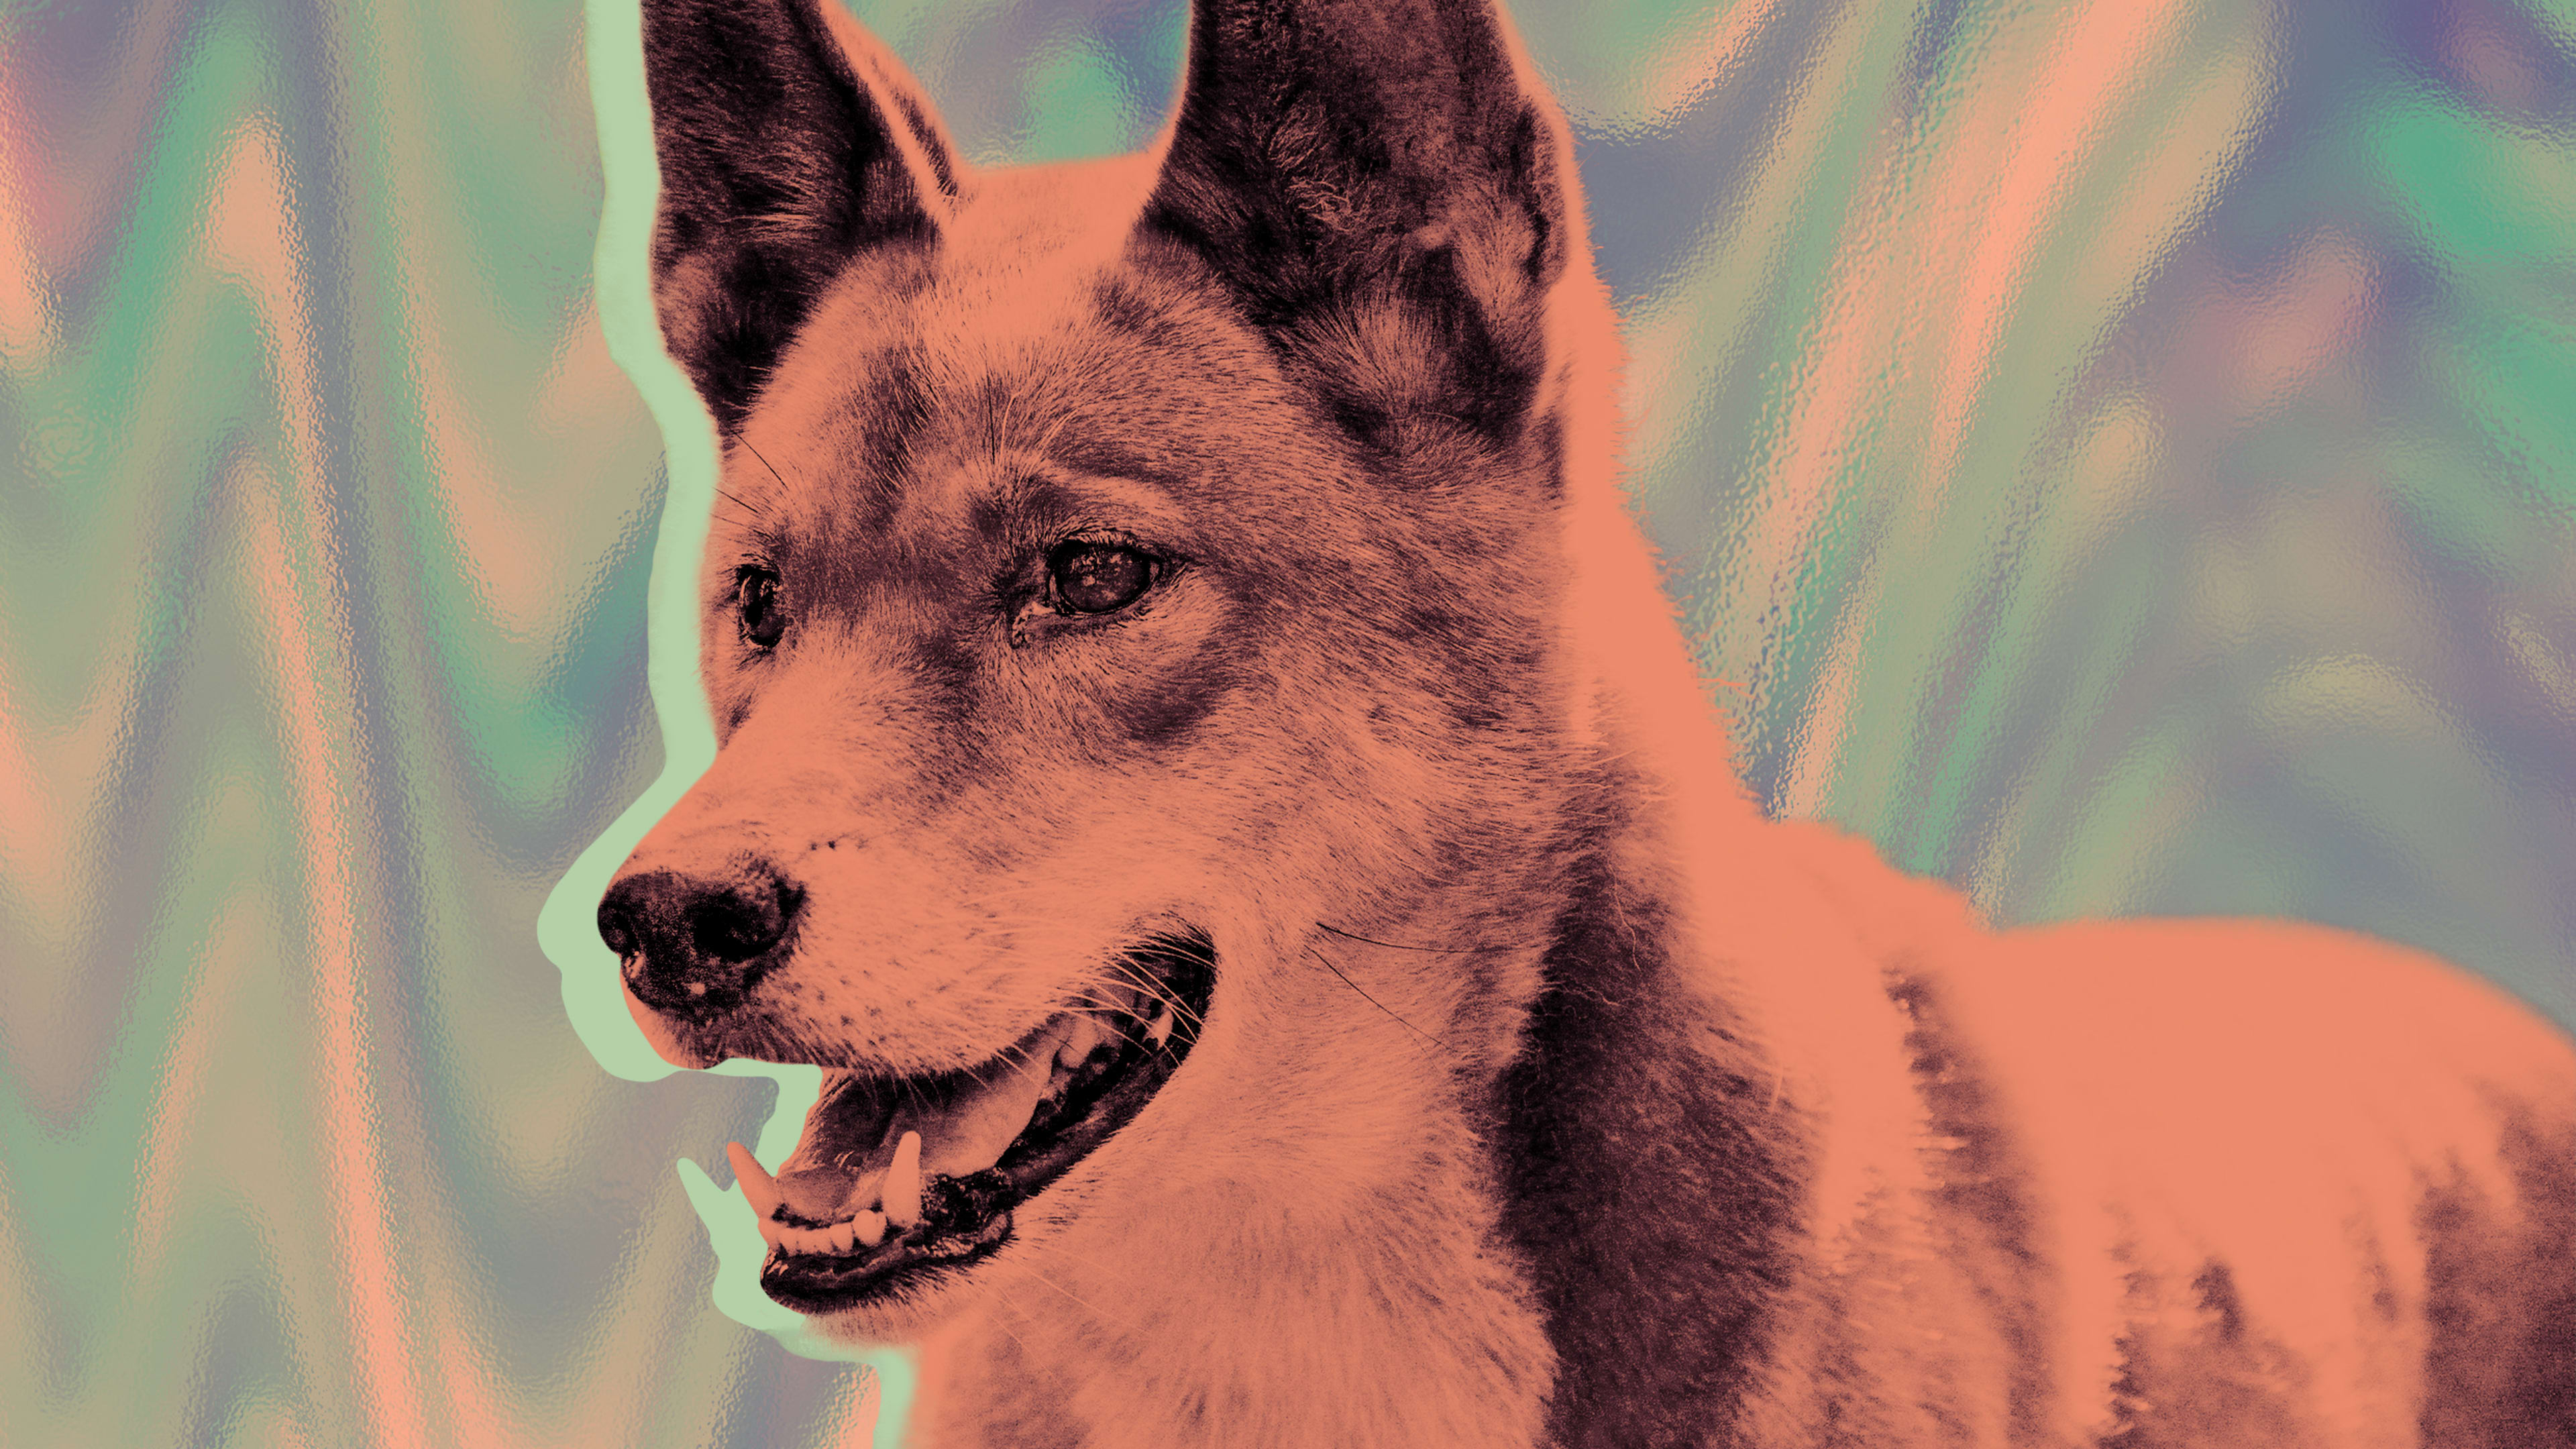 What makes your dog, a dog? Ask a dingo